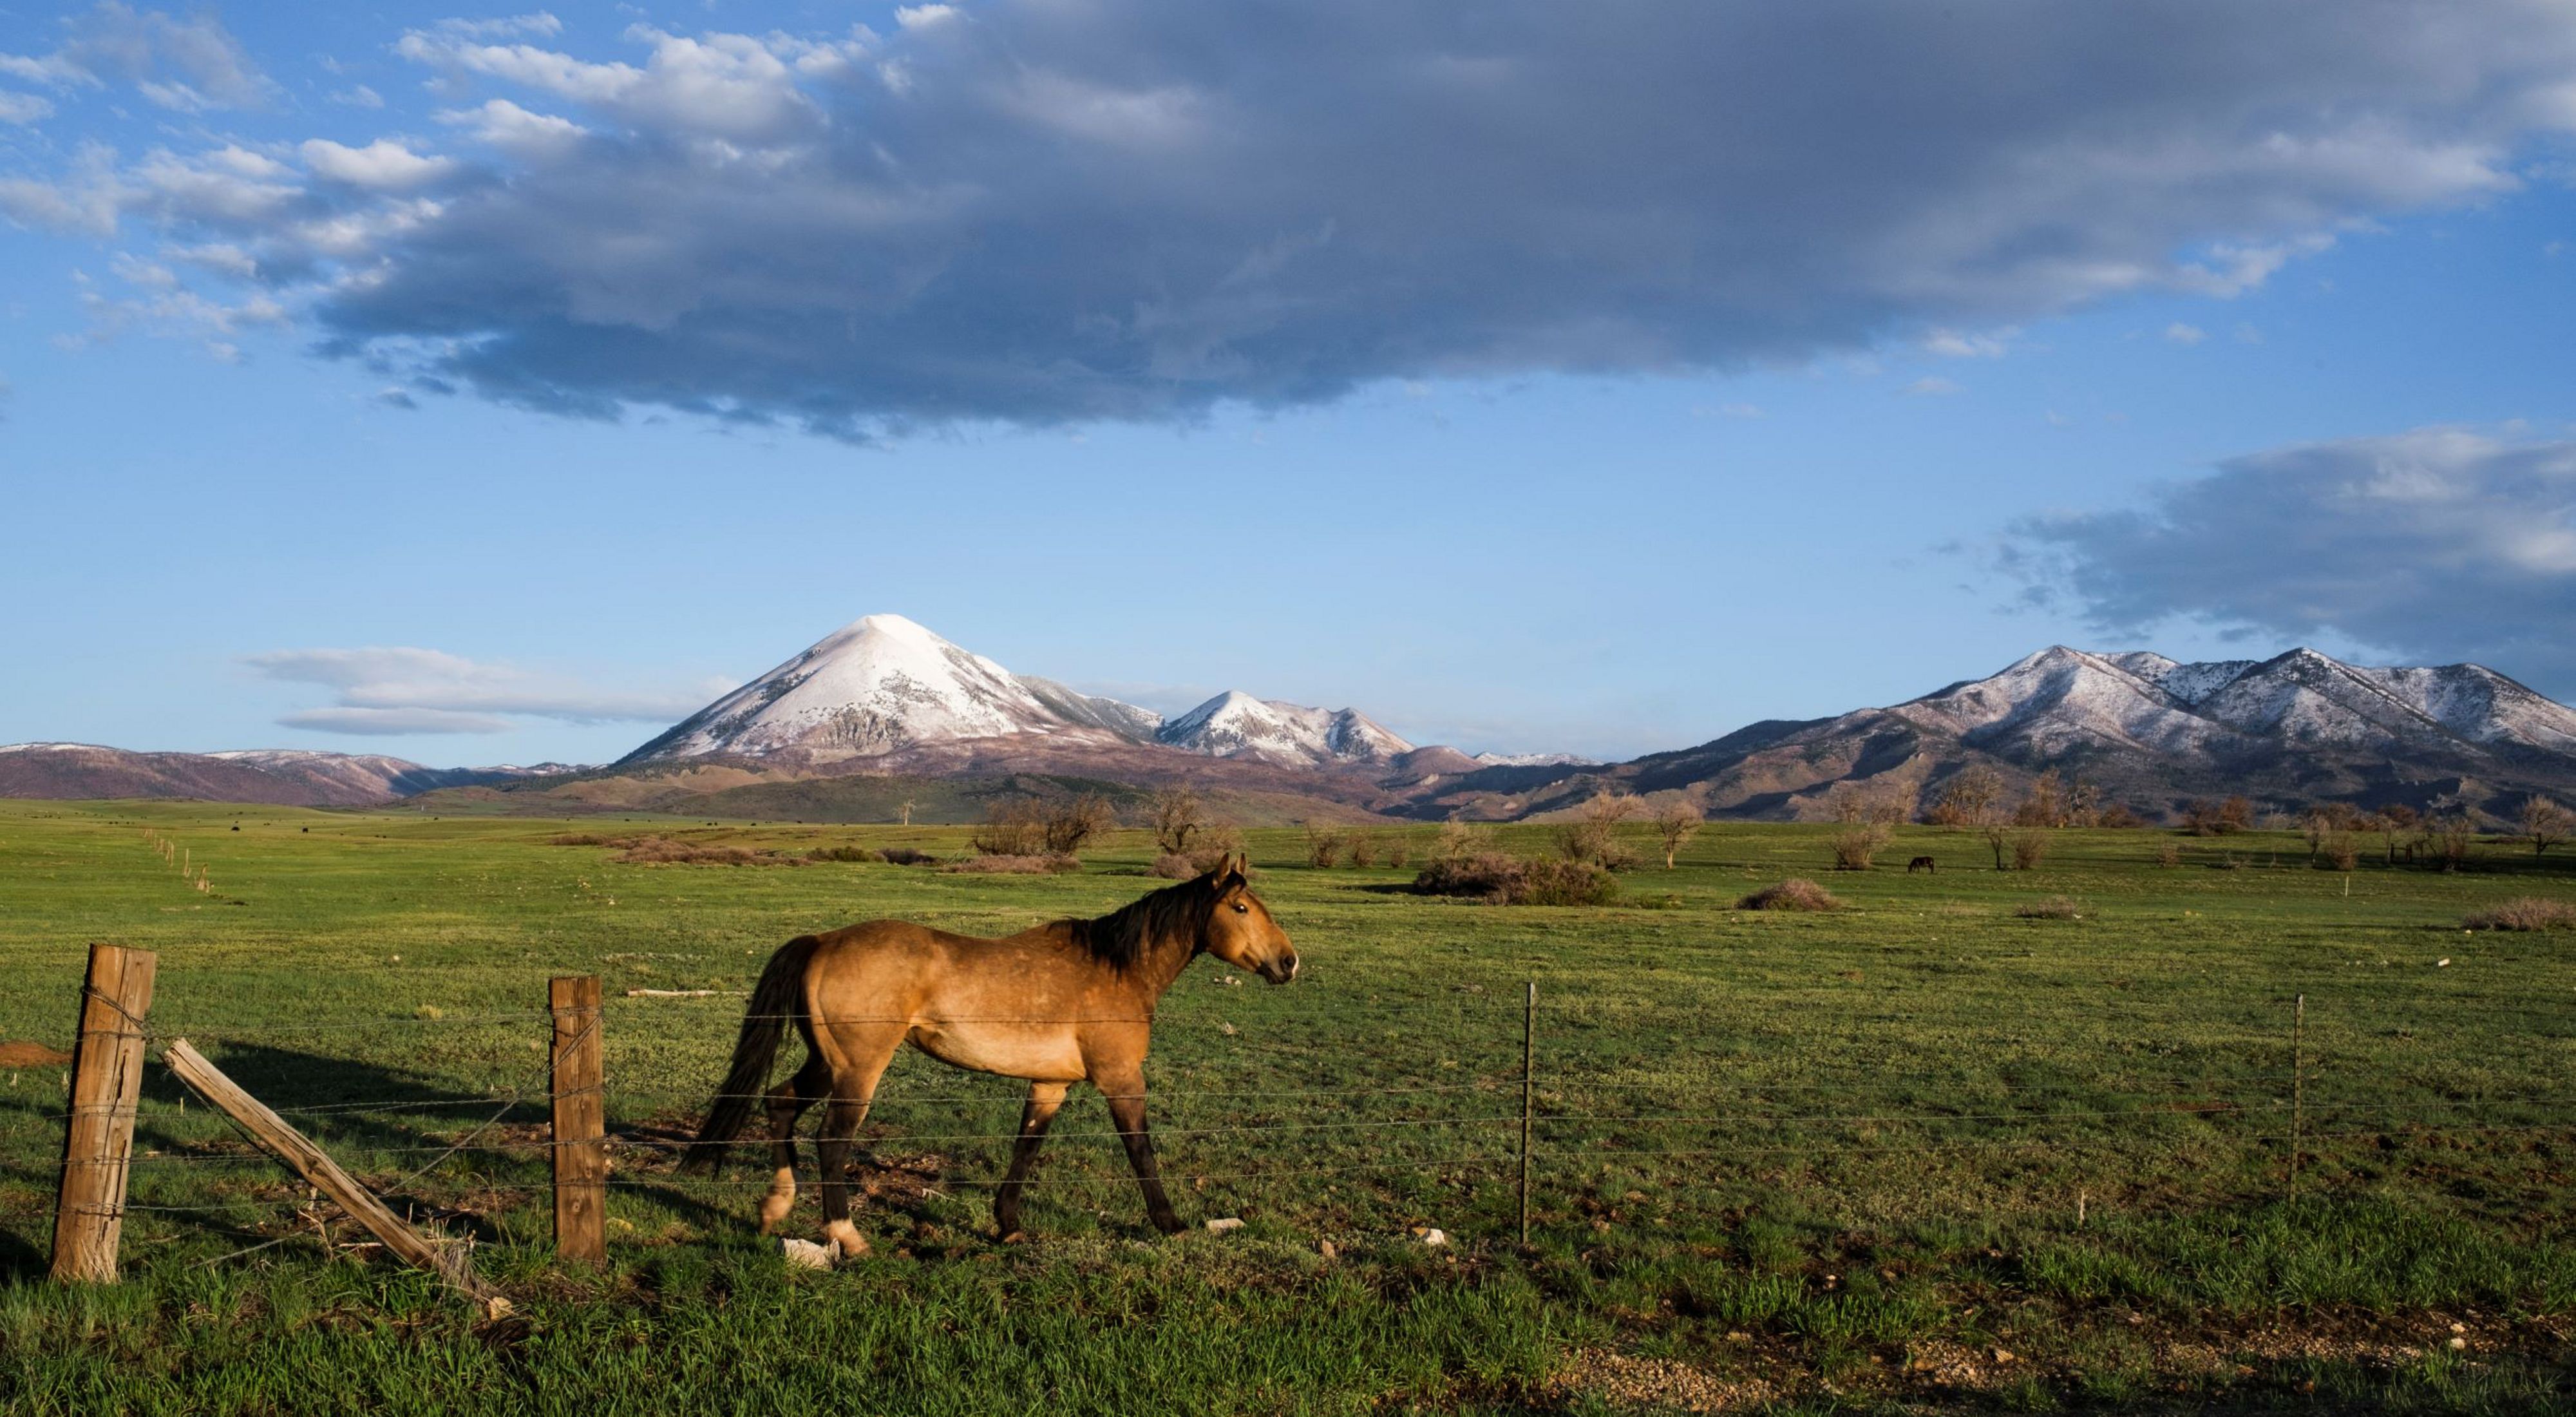 A horse walking on grass with snow capped mountains in the background.